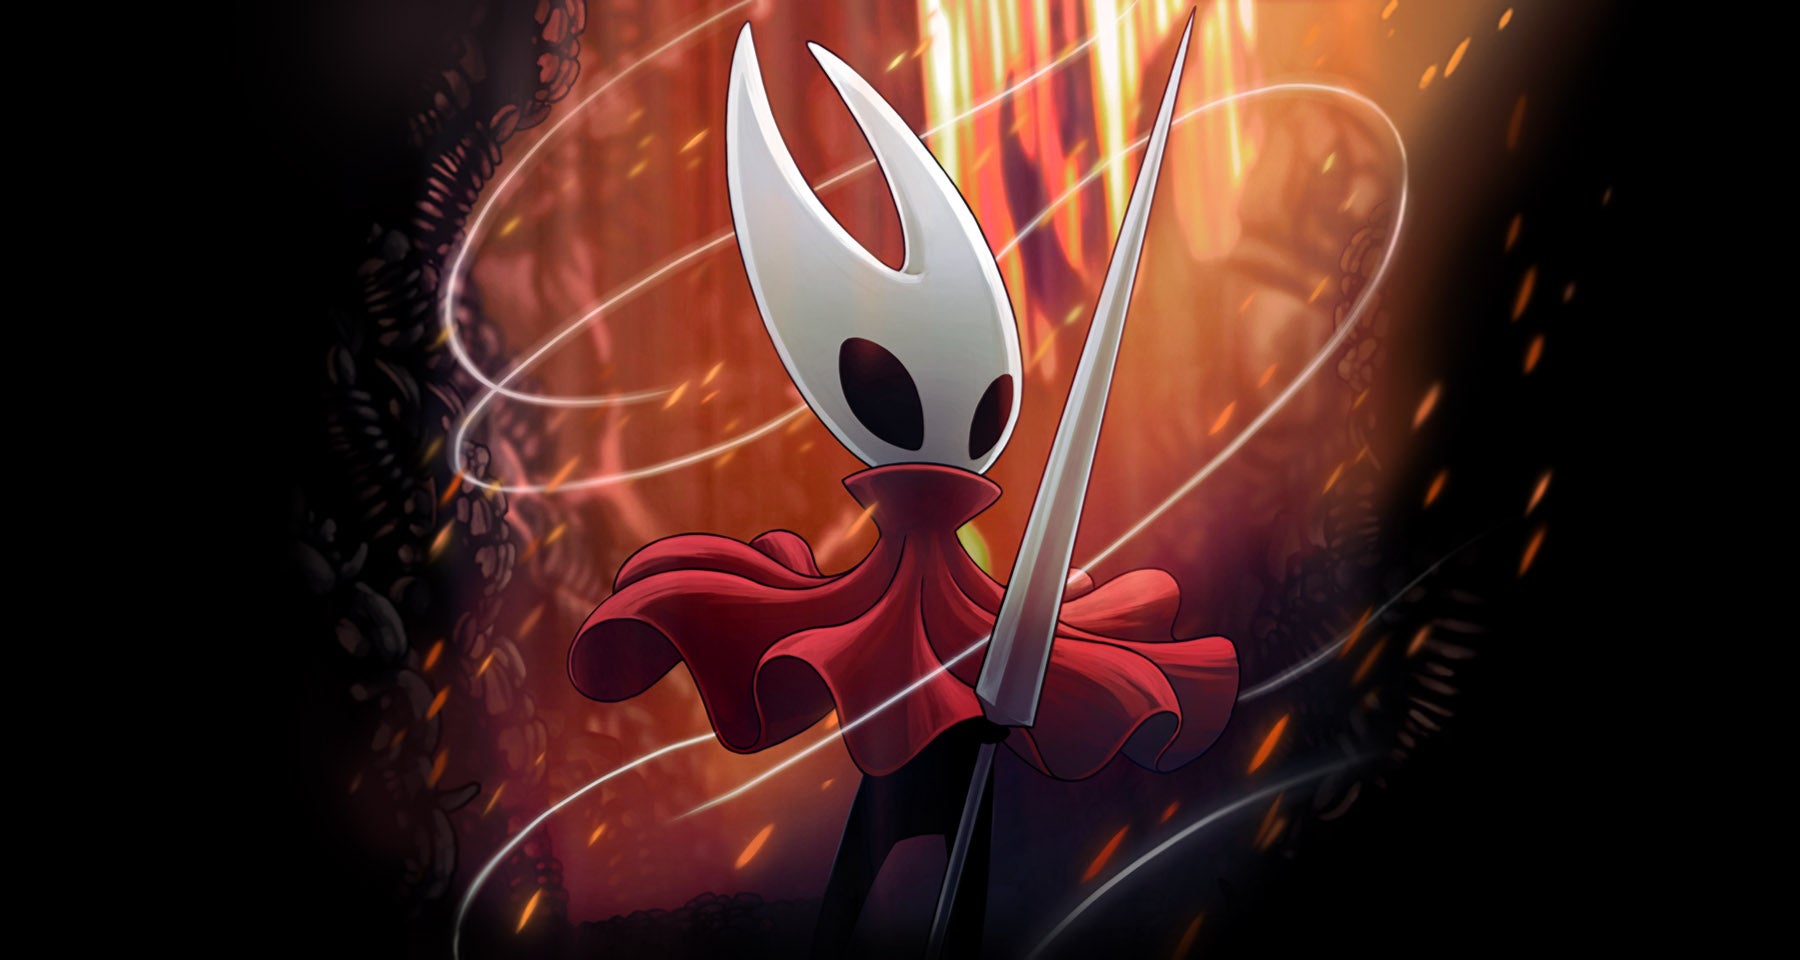 Image for Hollow Knight: Silksong in development, and it's free if you backed original on Kickstarter